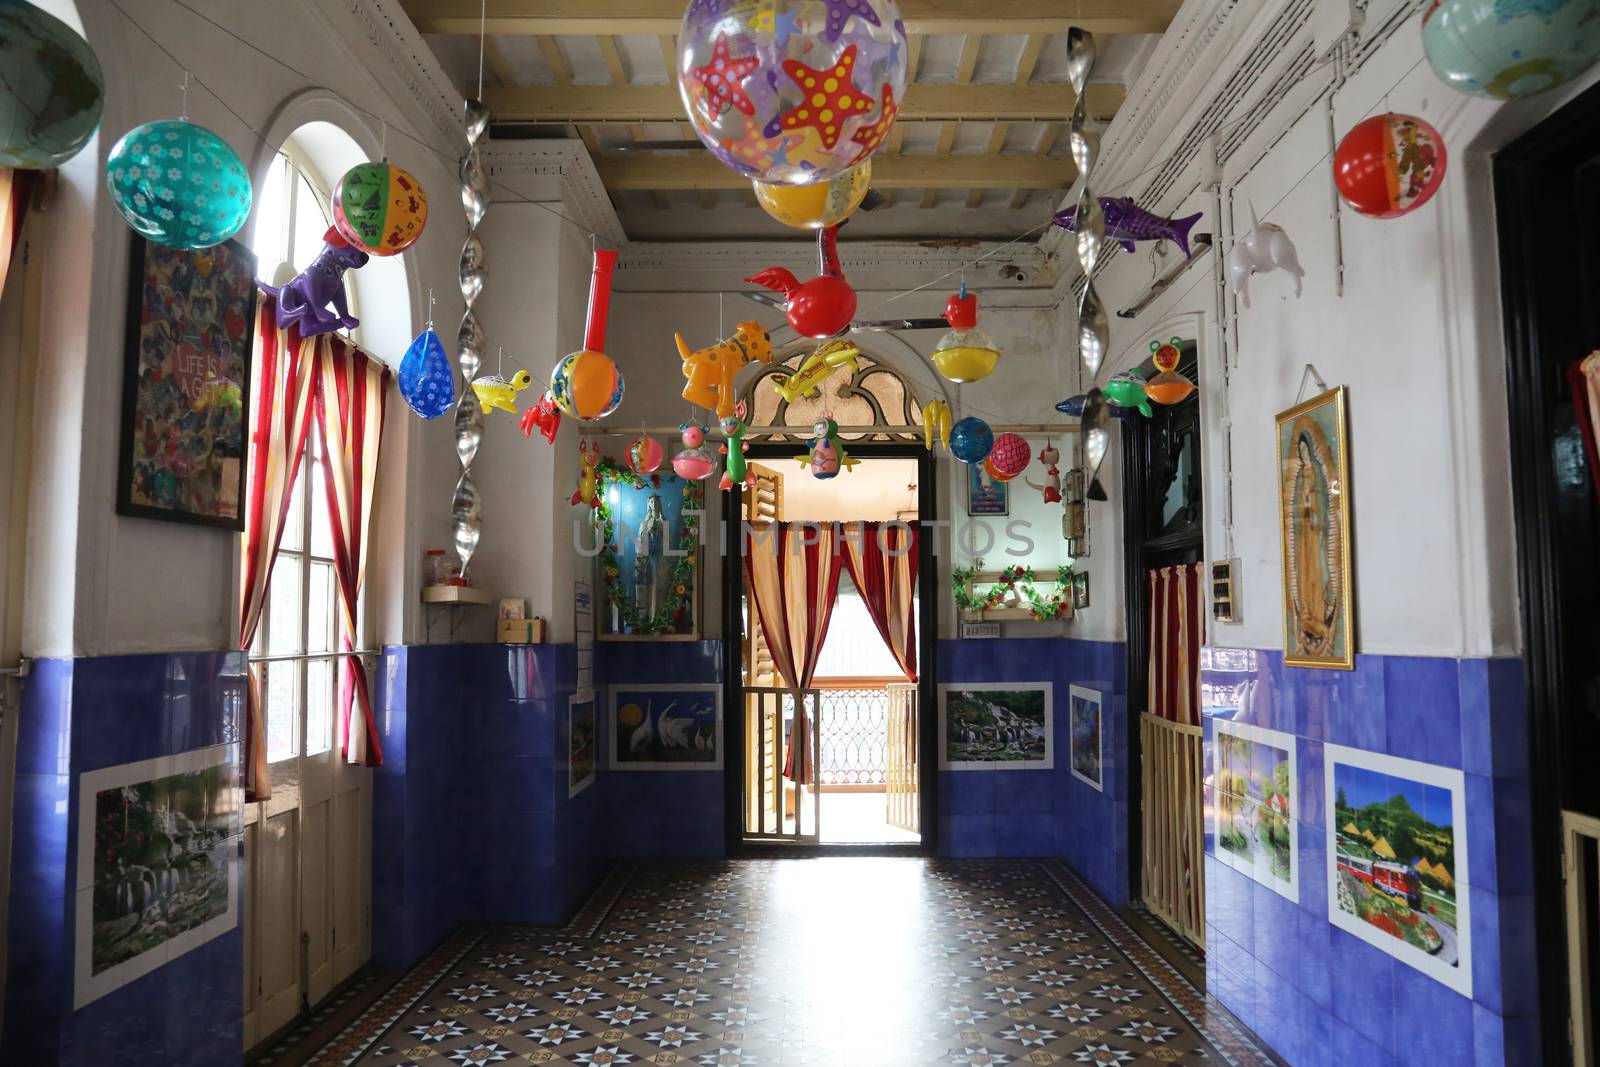 Shishu Bhavan, one of the houses established by Mother Teresa and run by the Missionaries of Charity in Kolkata by atlas